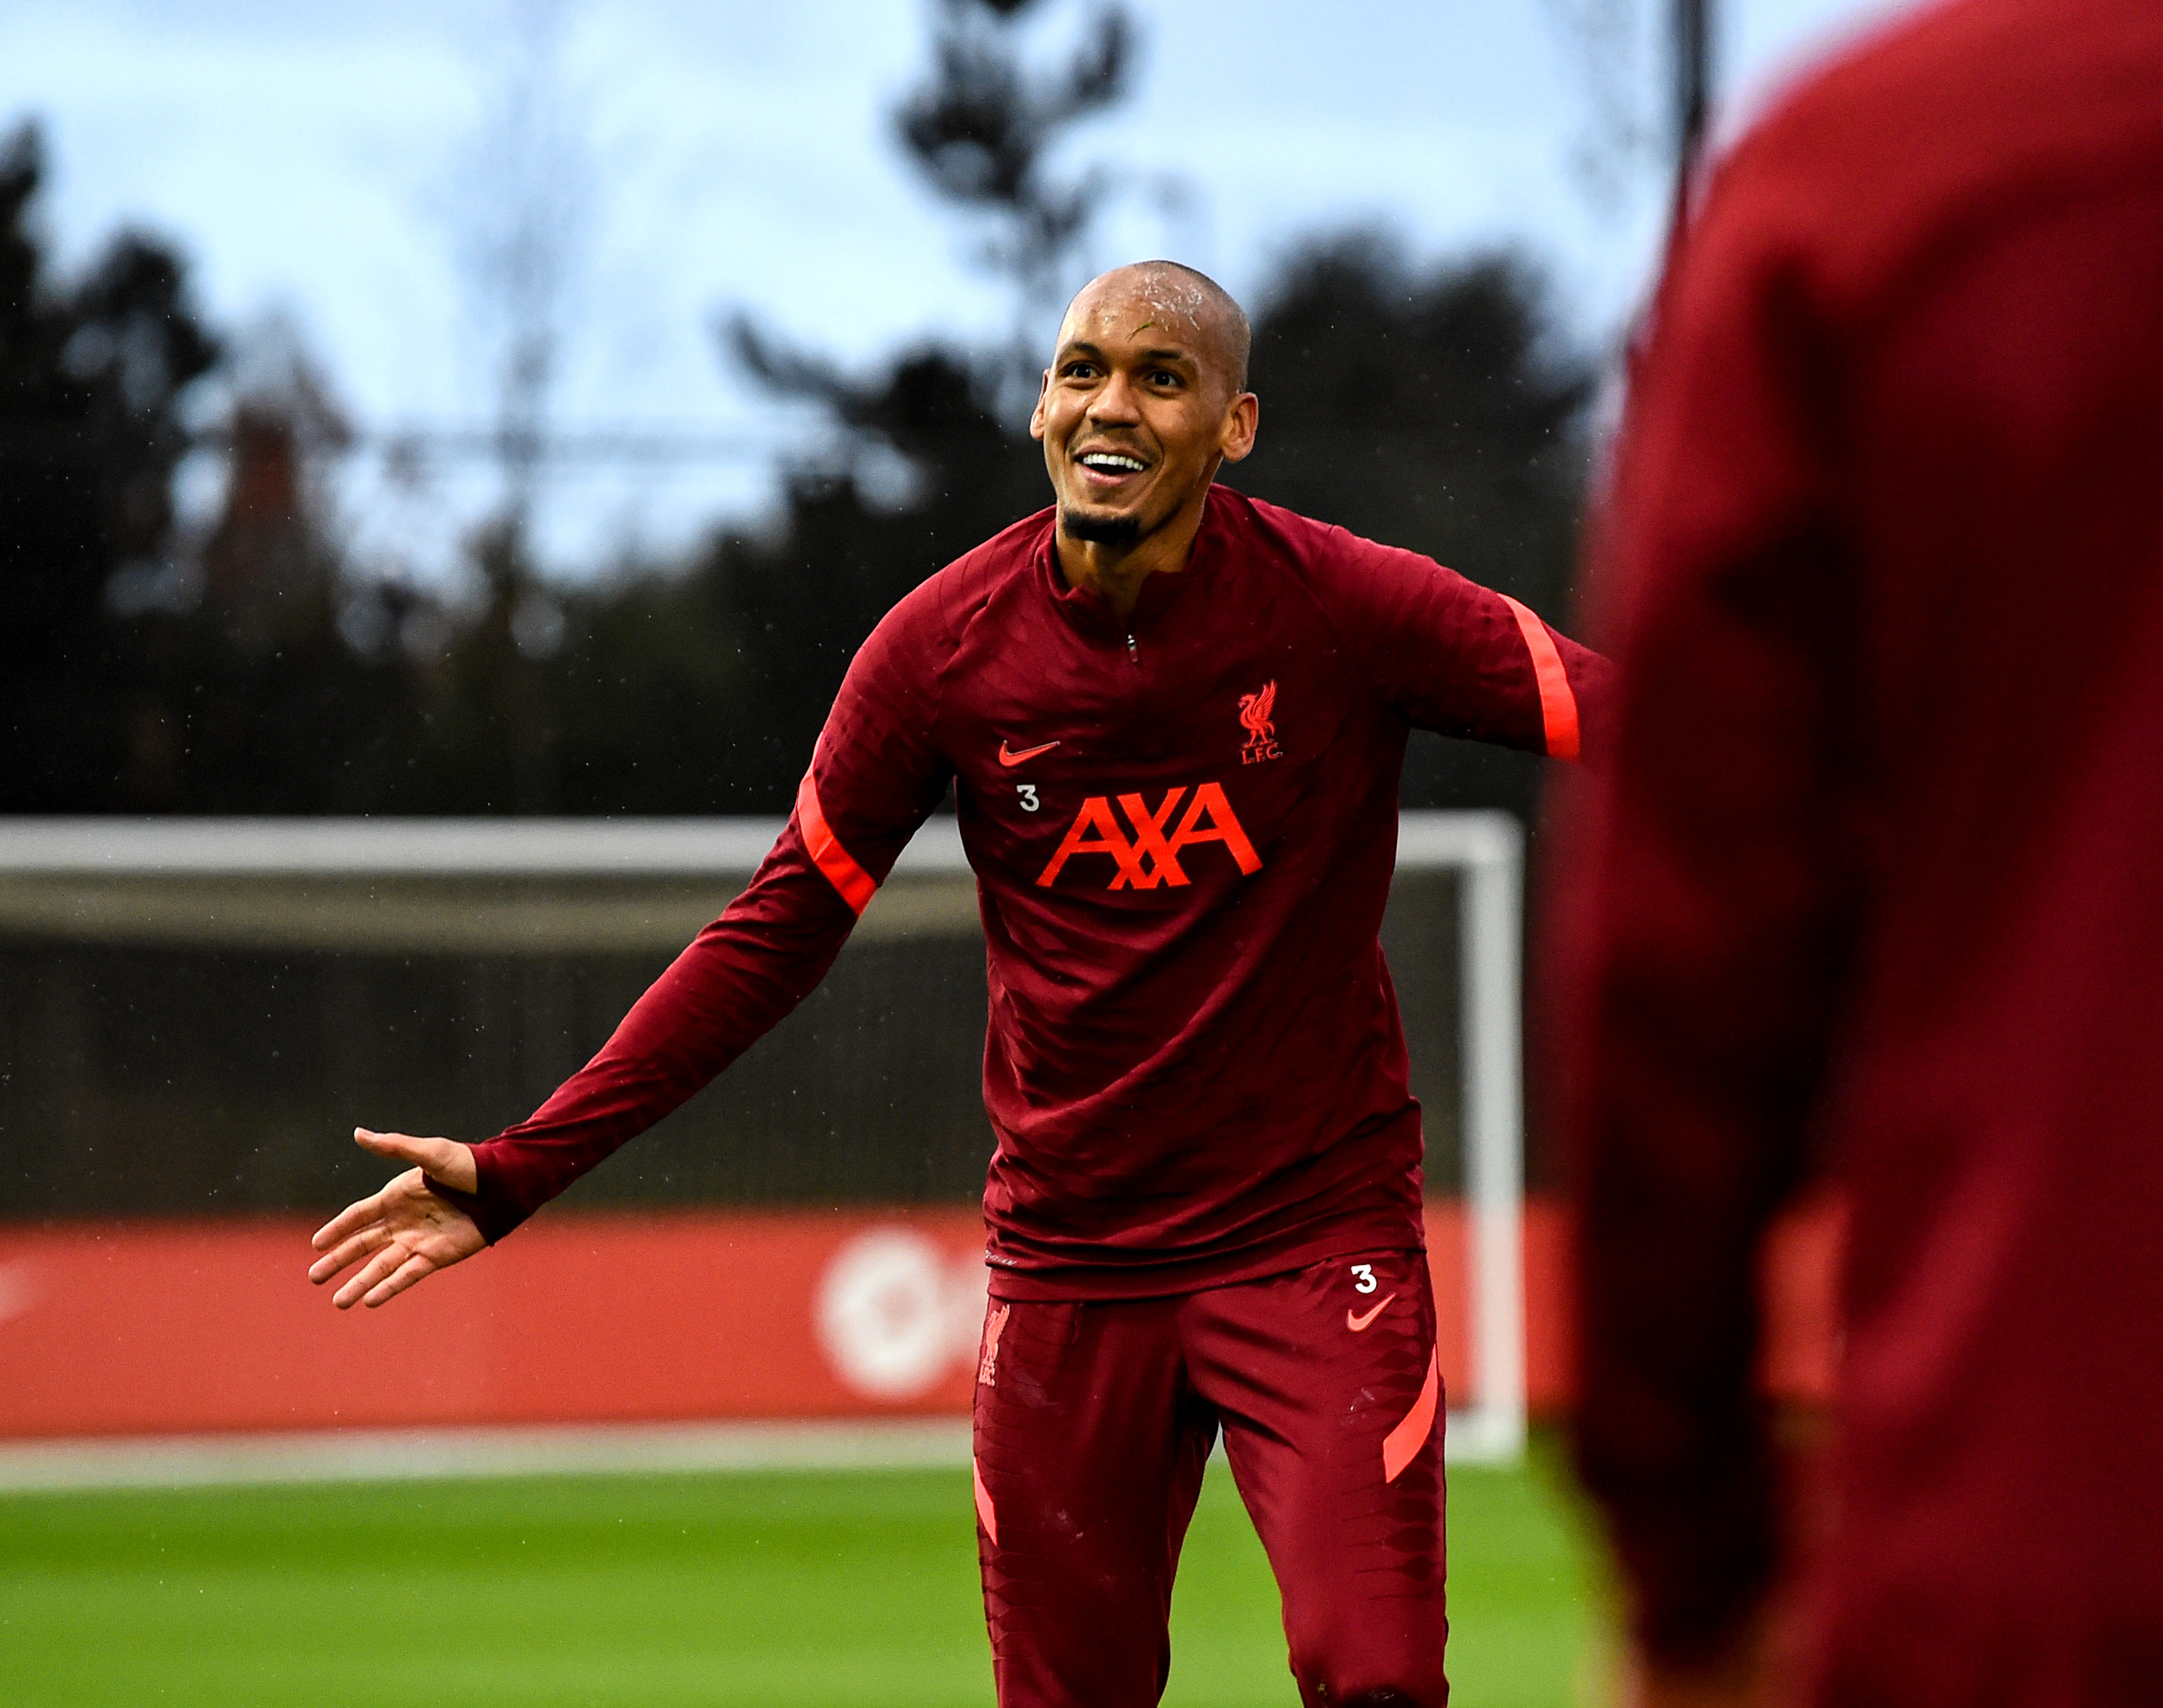 Fabinho of Liverpool during a training session at AXA Training Centre on November 01, 2021 in Kirkby, England.